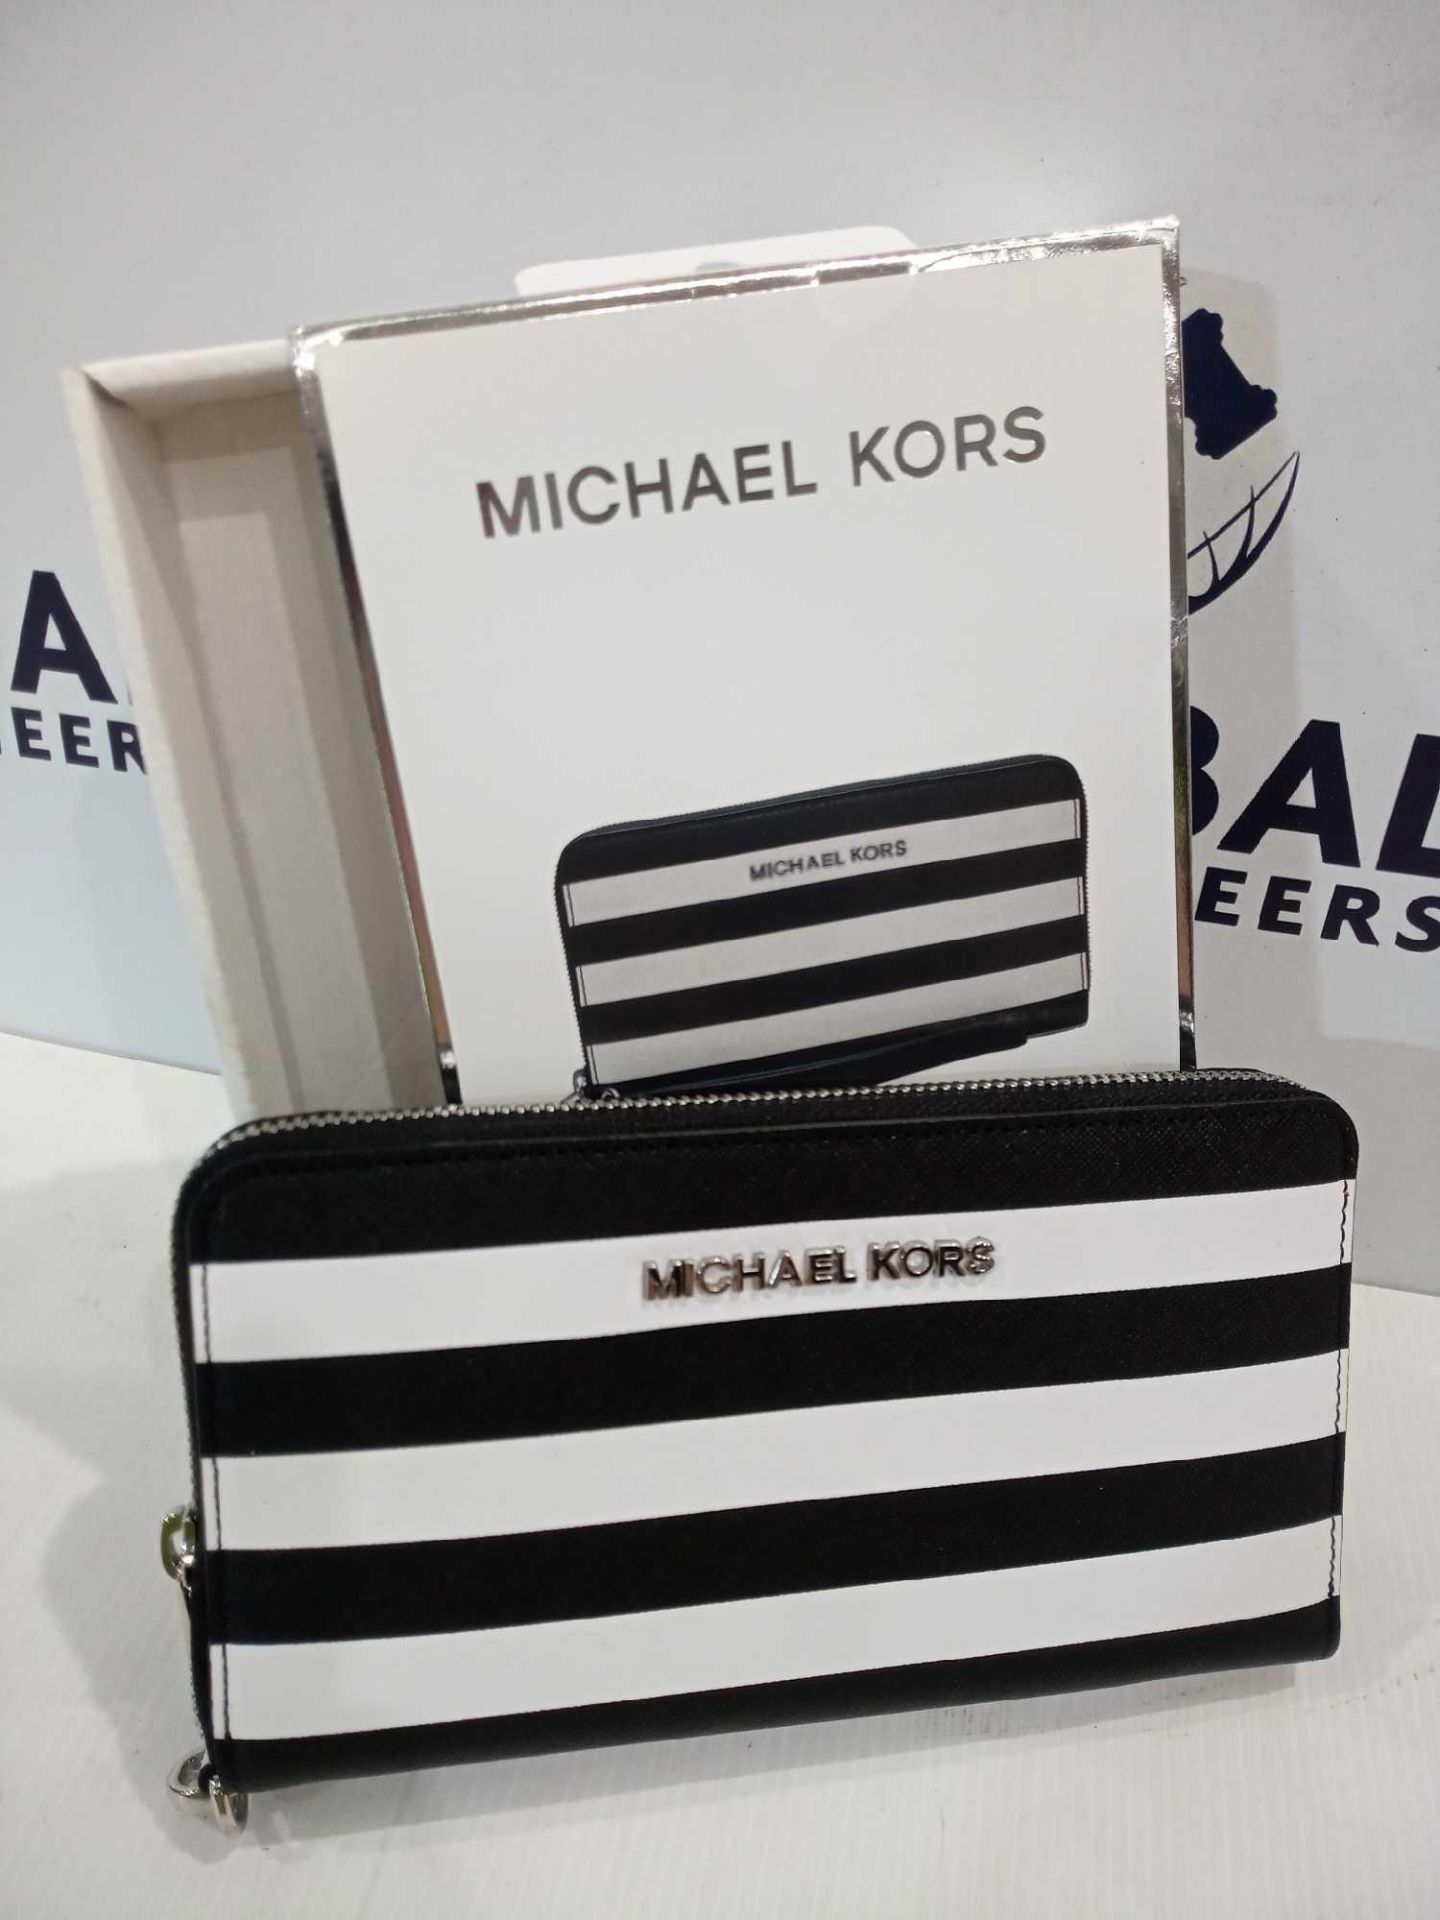 RRP £60 Each Boxed Brand New Michael Kors Black And White Large Multifunction Ladies Purses With A P